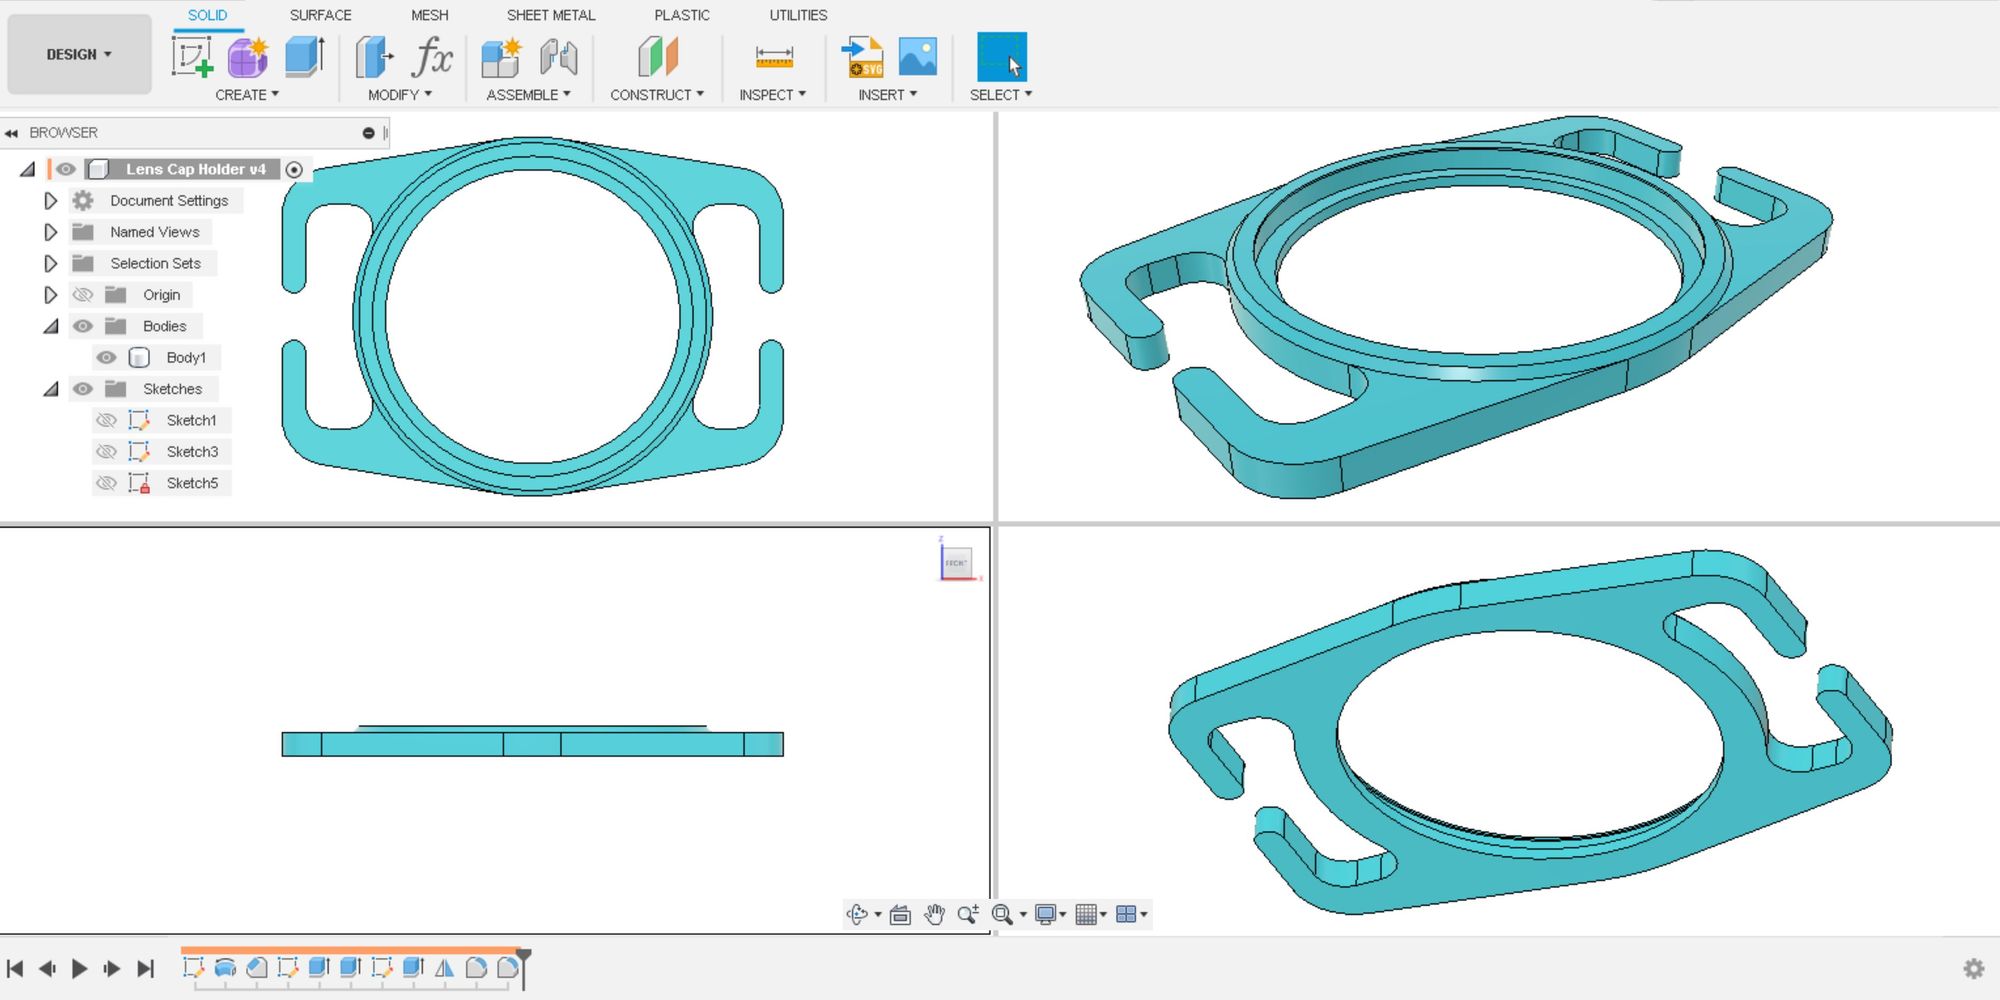 A screenshot of Autodesk Fusion 360 graphics window, showing 4 views of a lens cap holder